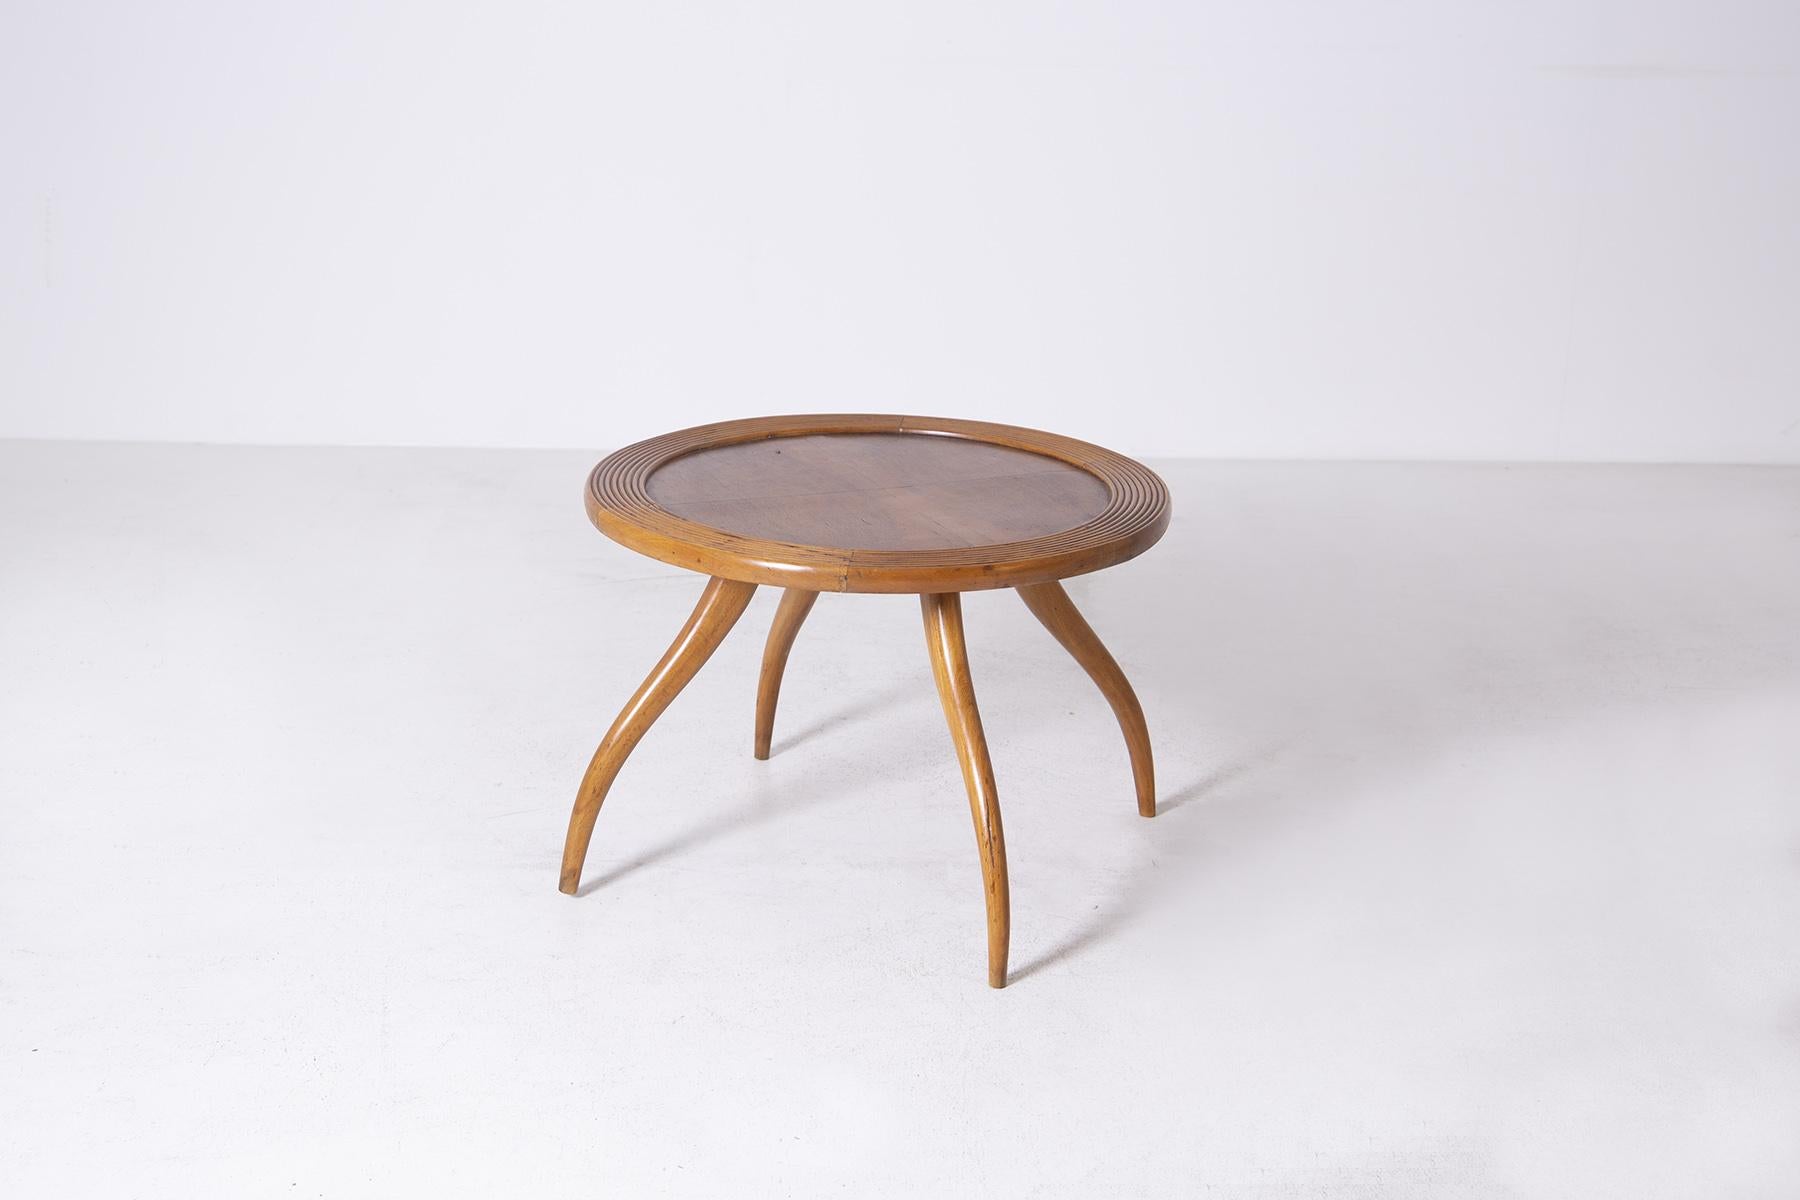 Refined wooden coffee table attributed to Osvaldo Borsani from the 1950s. Cherry wood. The table top is round and its peculiarity is its circumference made with grissinatura. In the centre we find the perfectly smooth top, made for placing various